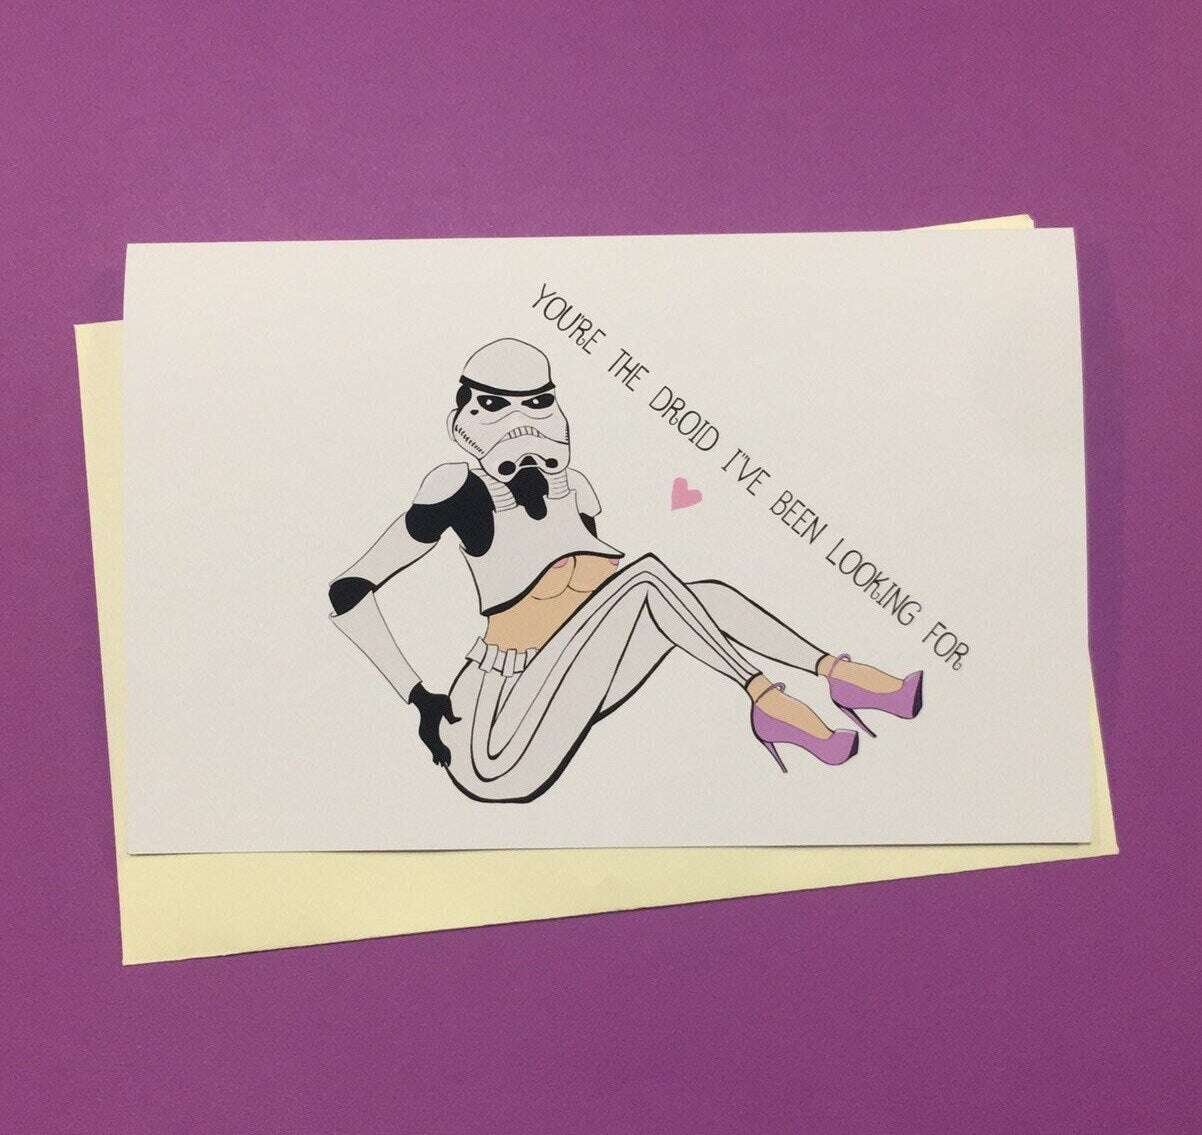 star wars romance card- envelope included